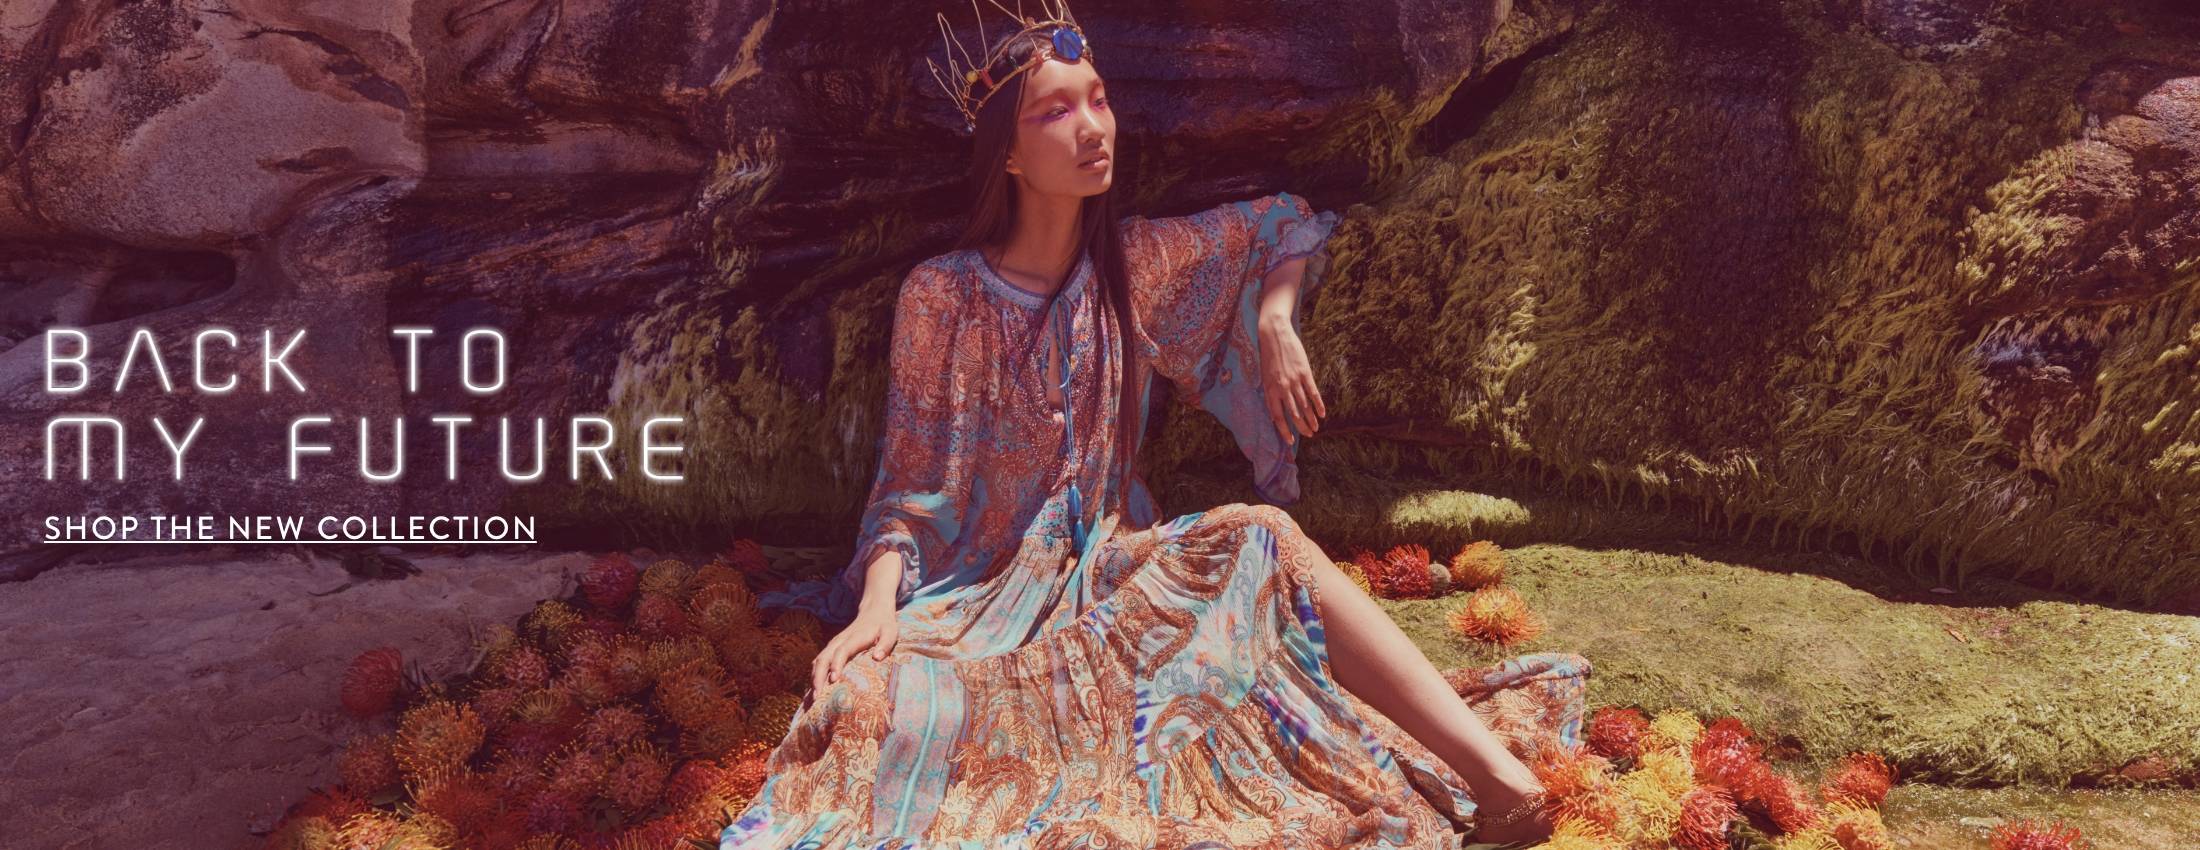 CAMILLA Back to my future new arrivals shop the new collection model wearing crown with orange and blue paisley print maxi dress